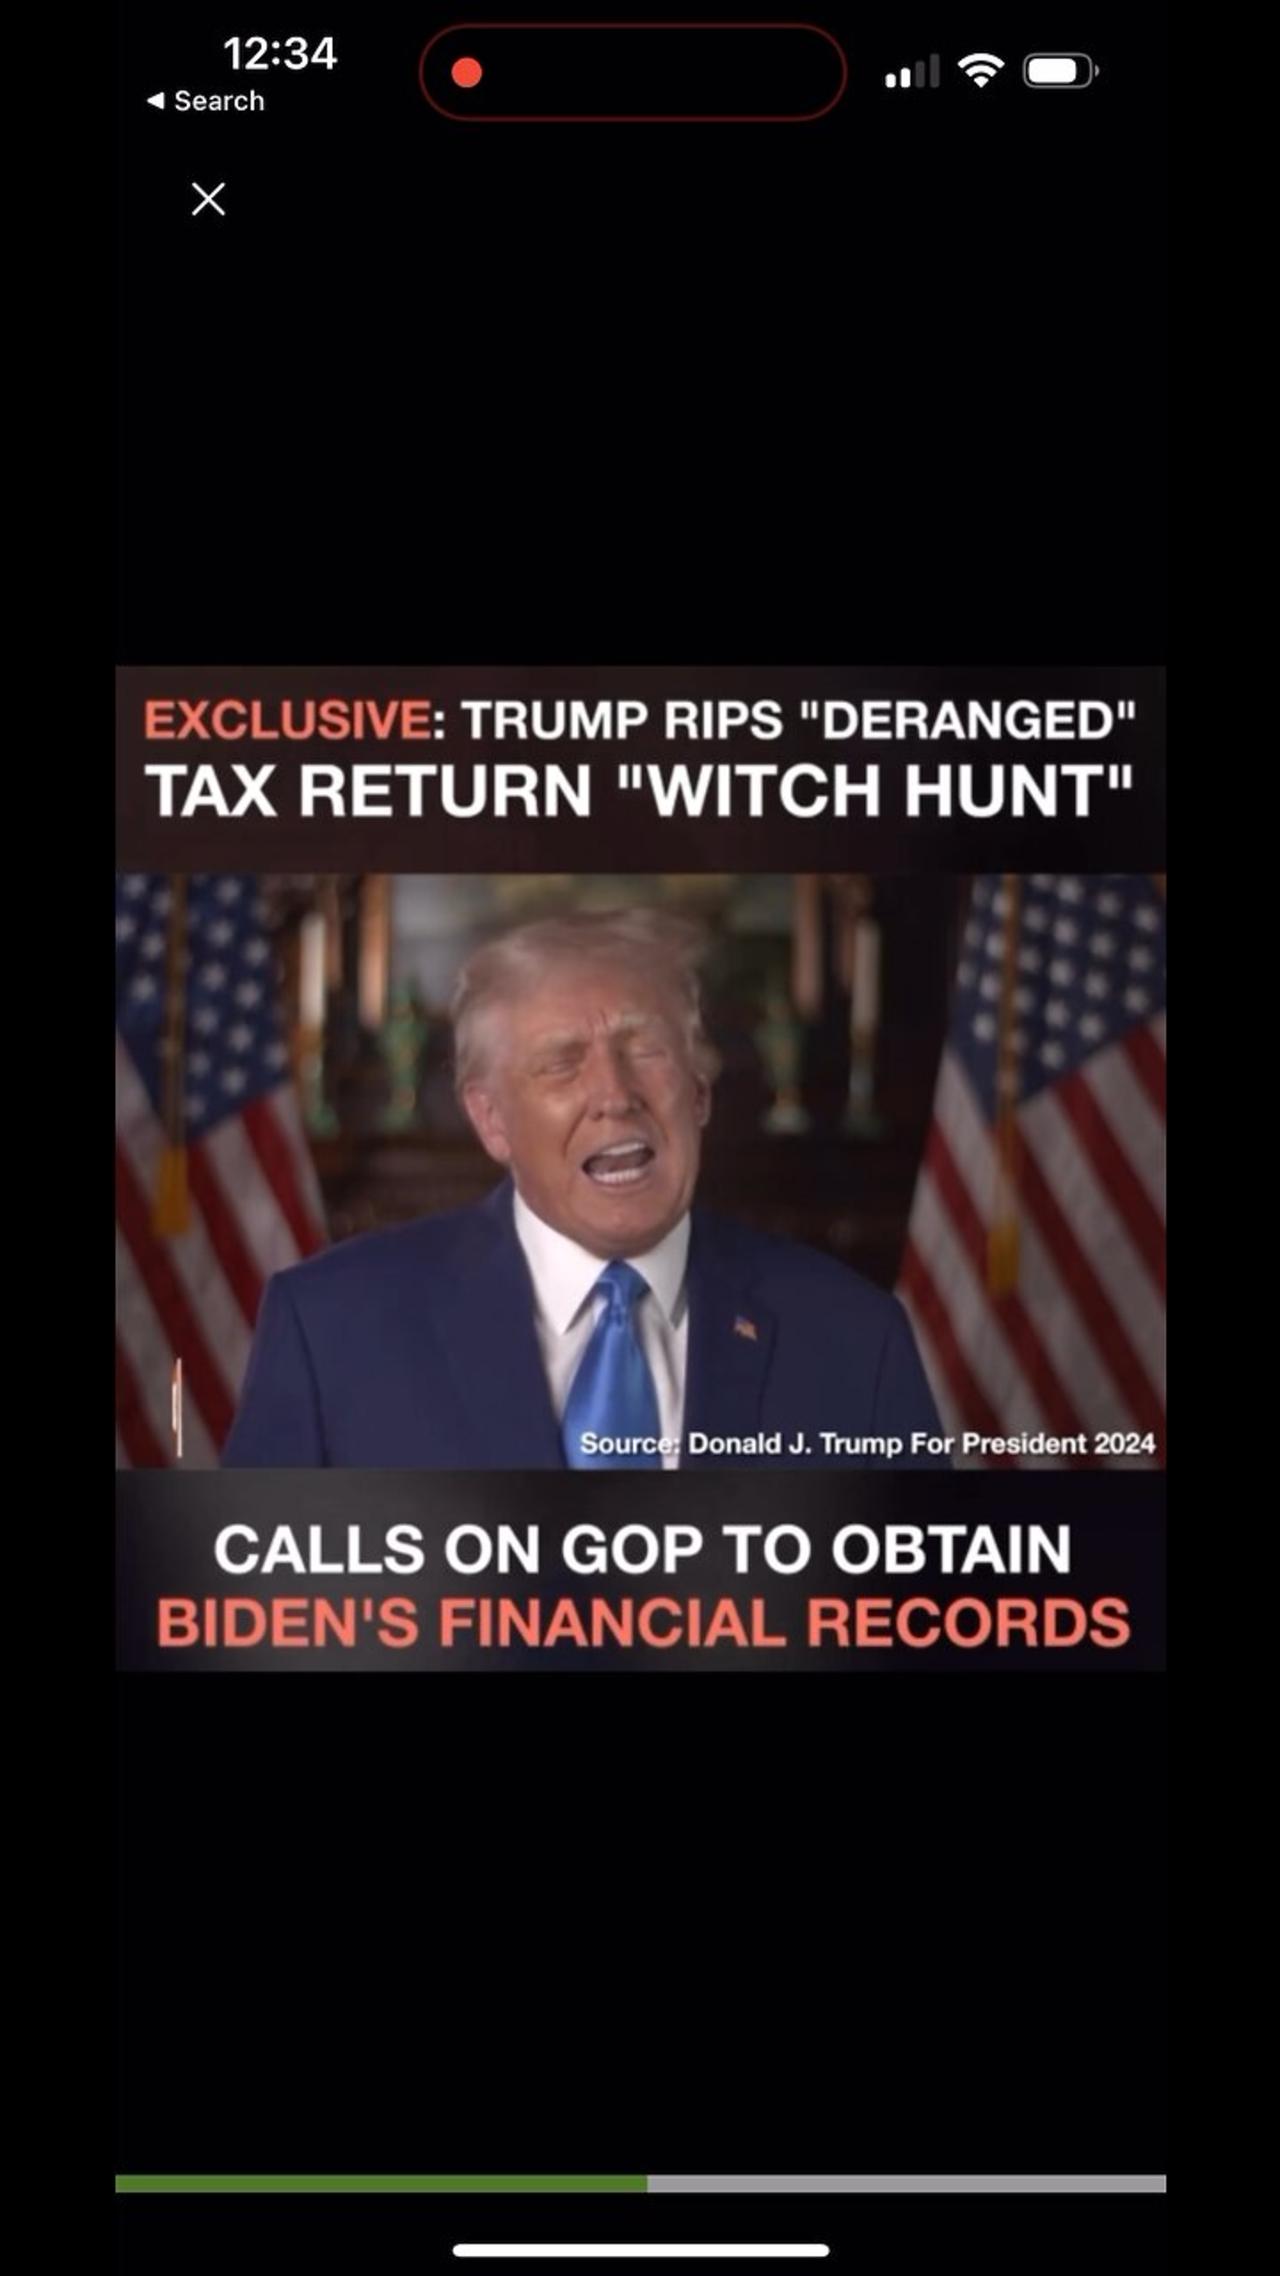 Breaking: Trump Rips Tax Return Witch Hunt and Calls GOP To Obtain Biden’s Financial Records m